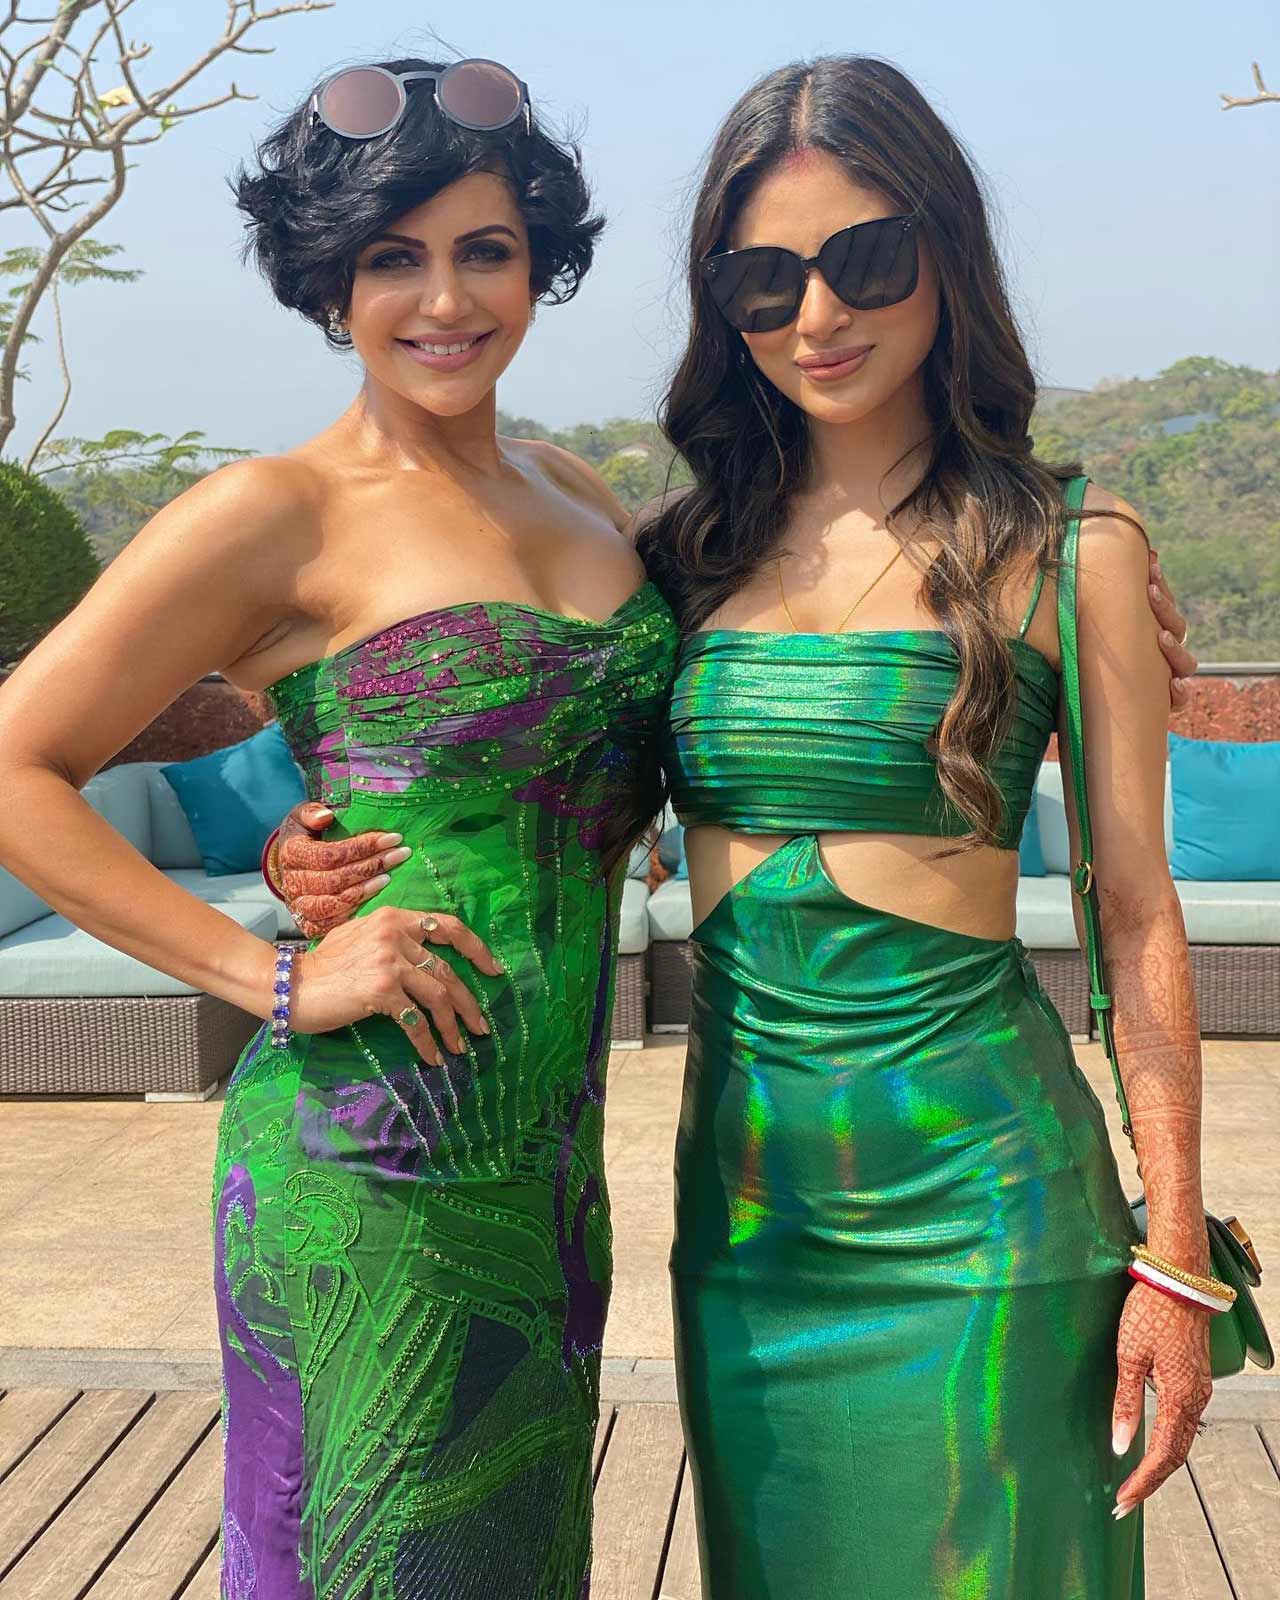 For the goa-style pool brunch, the new bride for a shiny green full-length dress, paired with shades and sindoor. Suraj wore a breezy blue-and-white shirt and trousers.